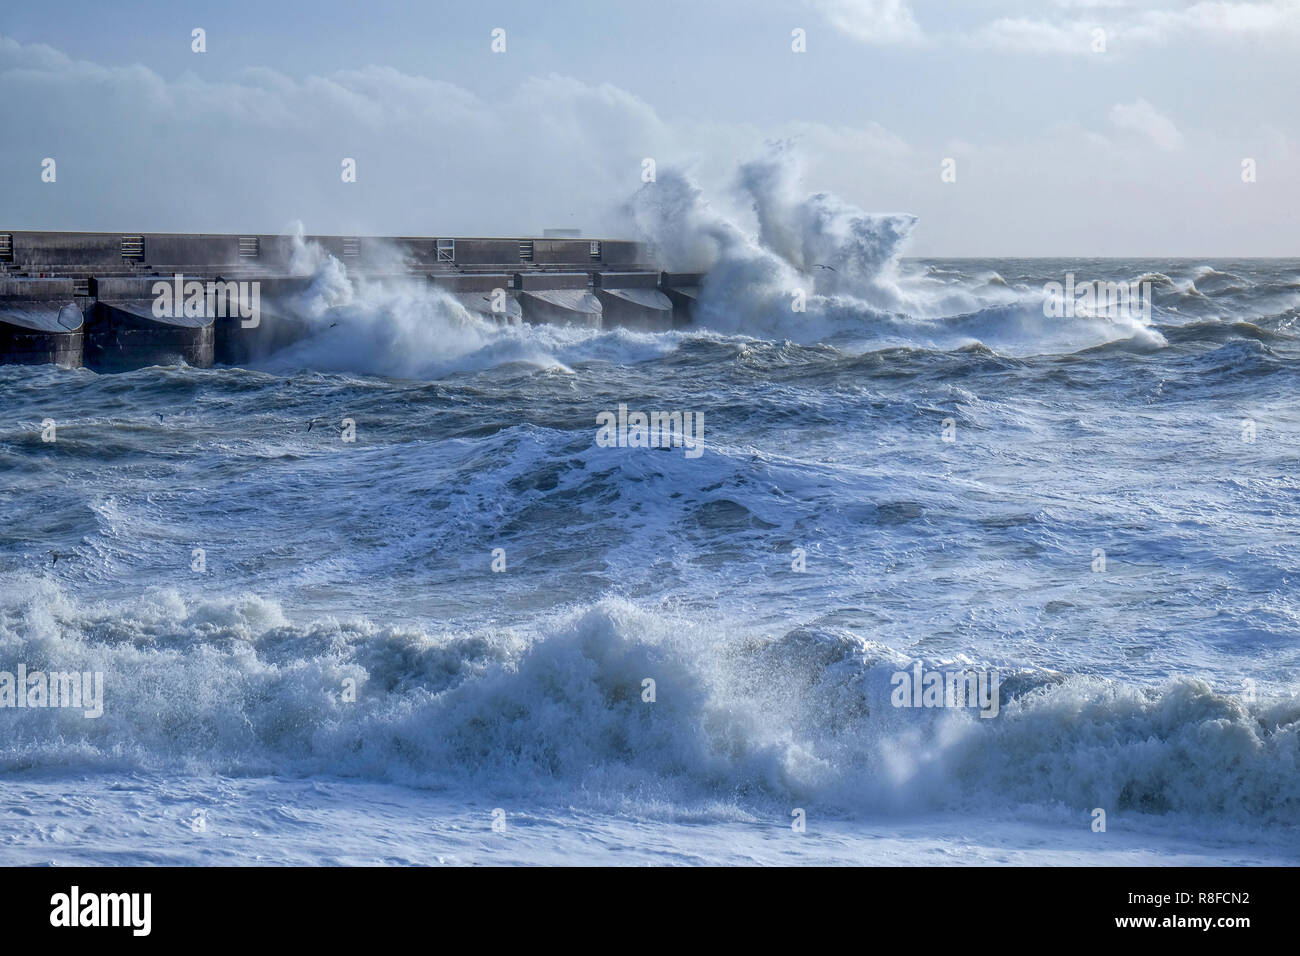 Dramatic stormy sea breaking against Brighton marina black stone harbour wall, spray and waves high in the air, rough sea, Brighton, East sussex, Uk Stock Photo